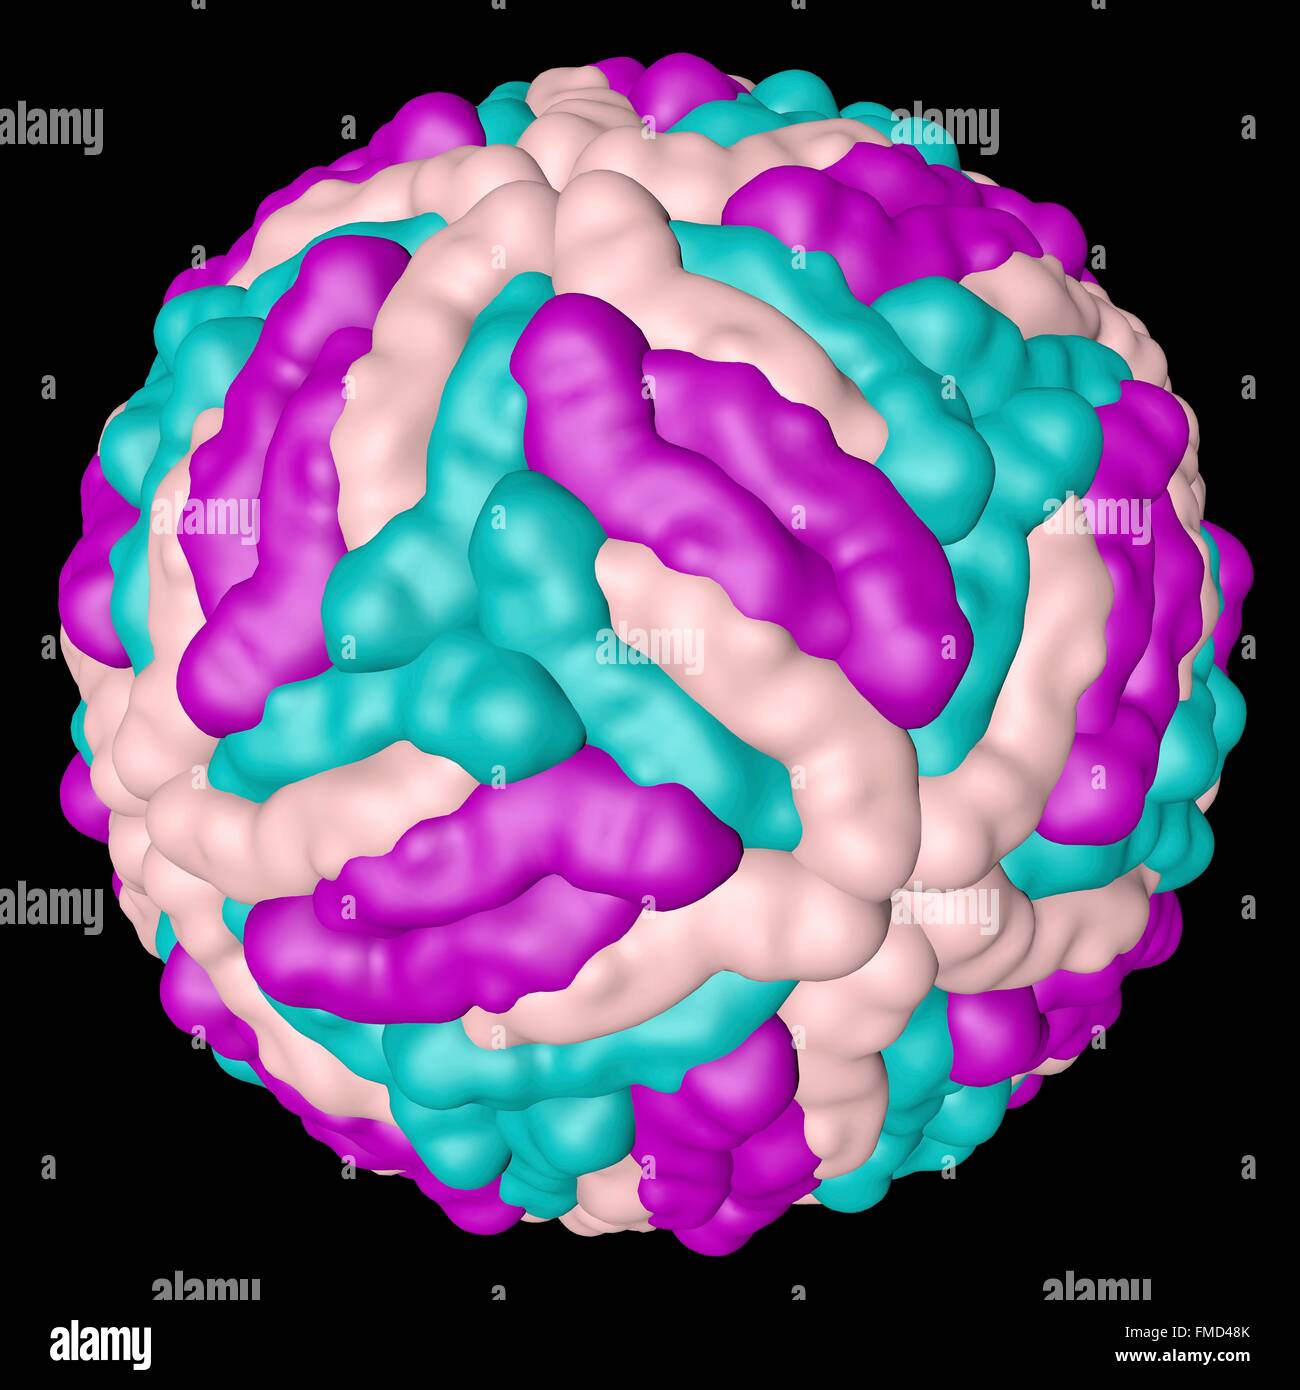 Dengue virus, computer model. Dengue virus is an RNA-virus from Flaviviridae family. It is transmitted by mosquitoes, and causes the tropical disease dengue fever. Symptoms can range from a mild fever and joint pain to spontaneous bleeding of the skin and circulatory failure, which are often fatal. Stock Photo